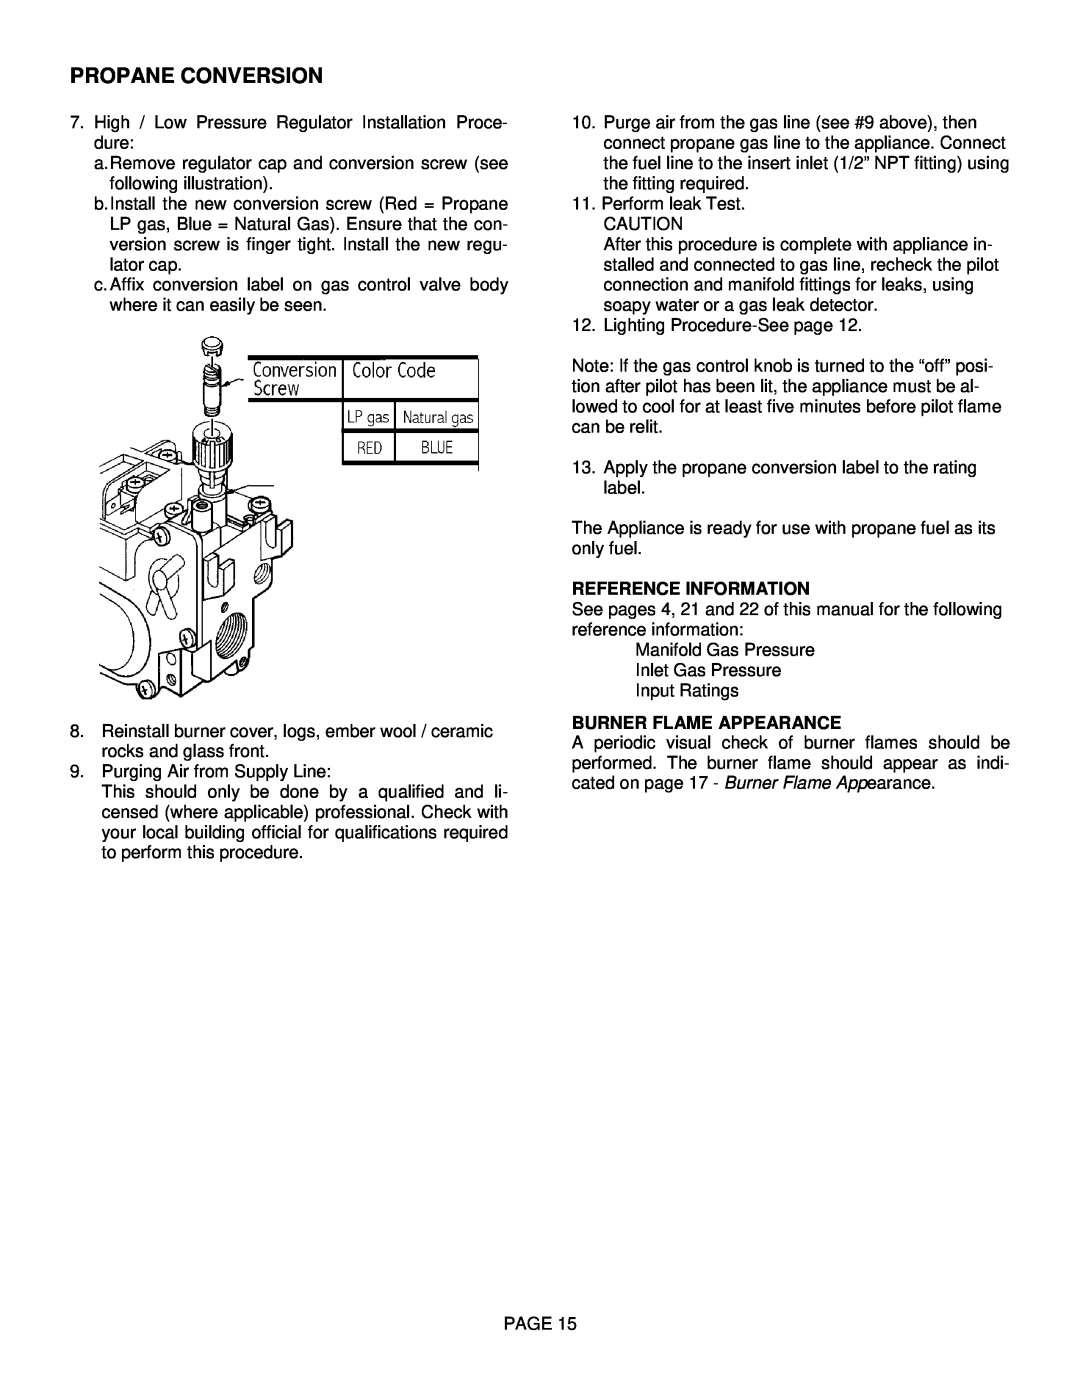 Lenoxx Electronics L30 BF-2 operation manual Reference Information, Burner Flame Appearance, Propane Conversion 